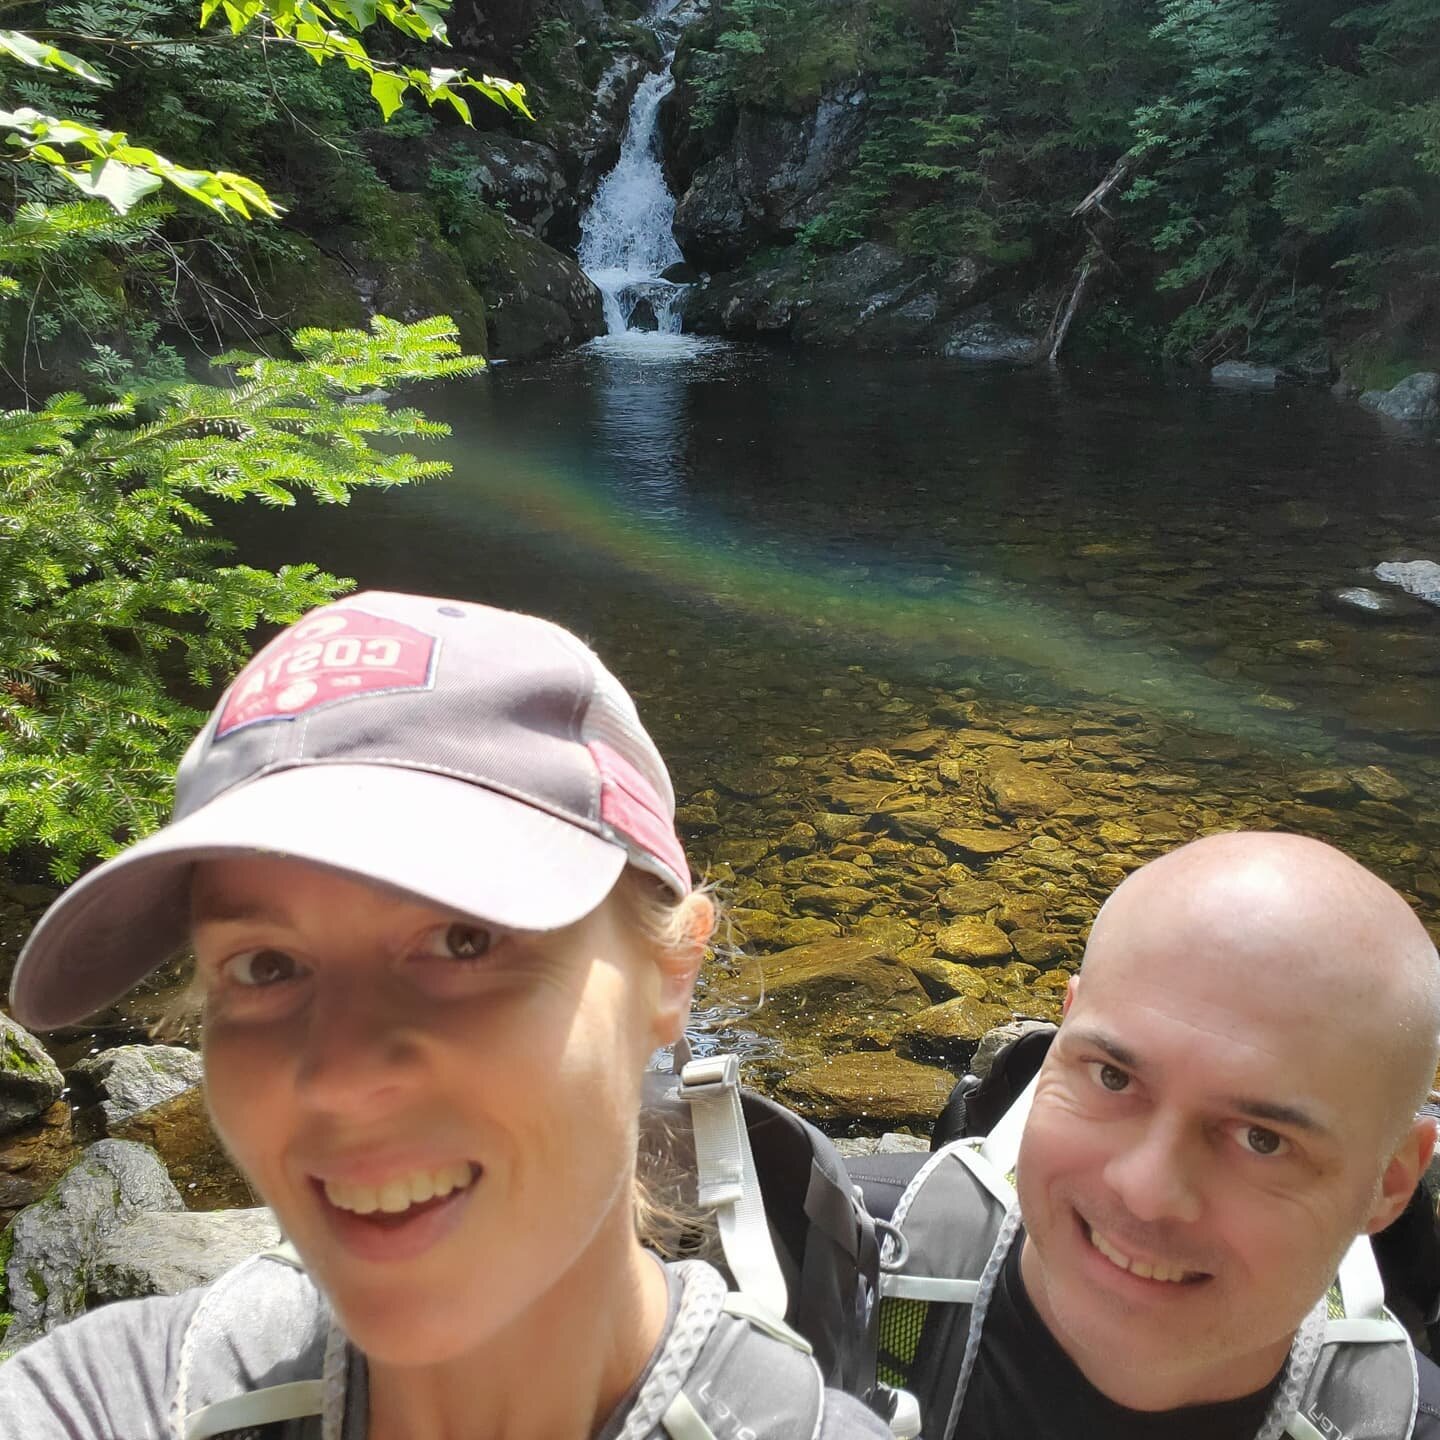 HIKE THE WHITES 4000FTS 
☆ Monroe 5390ft
☆ Washington 6284ft

Distance: 10.2 miles
Elevation Gain: 4260ft

Waterfalls: Many
Vistas: amazing when clouds would clear
Mud: Some

LOGISTICS: Took Ammonoosuc Ravine to lake of the clouds then Crawford for M